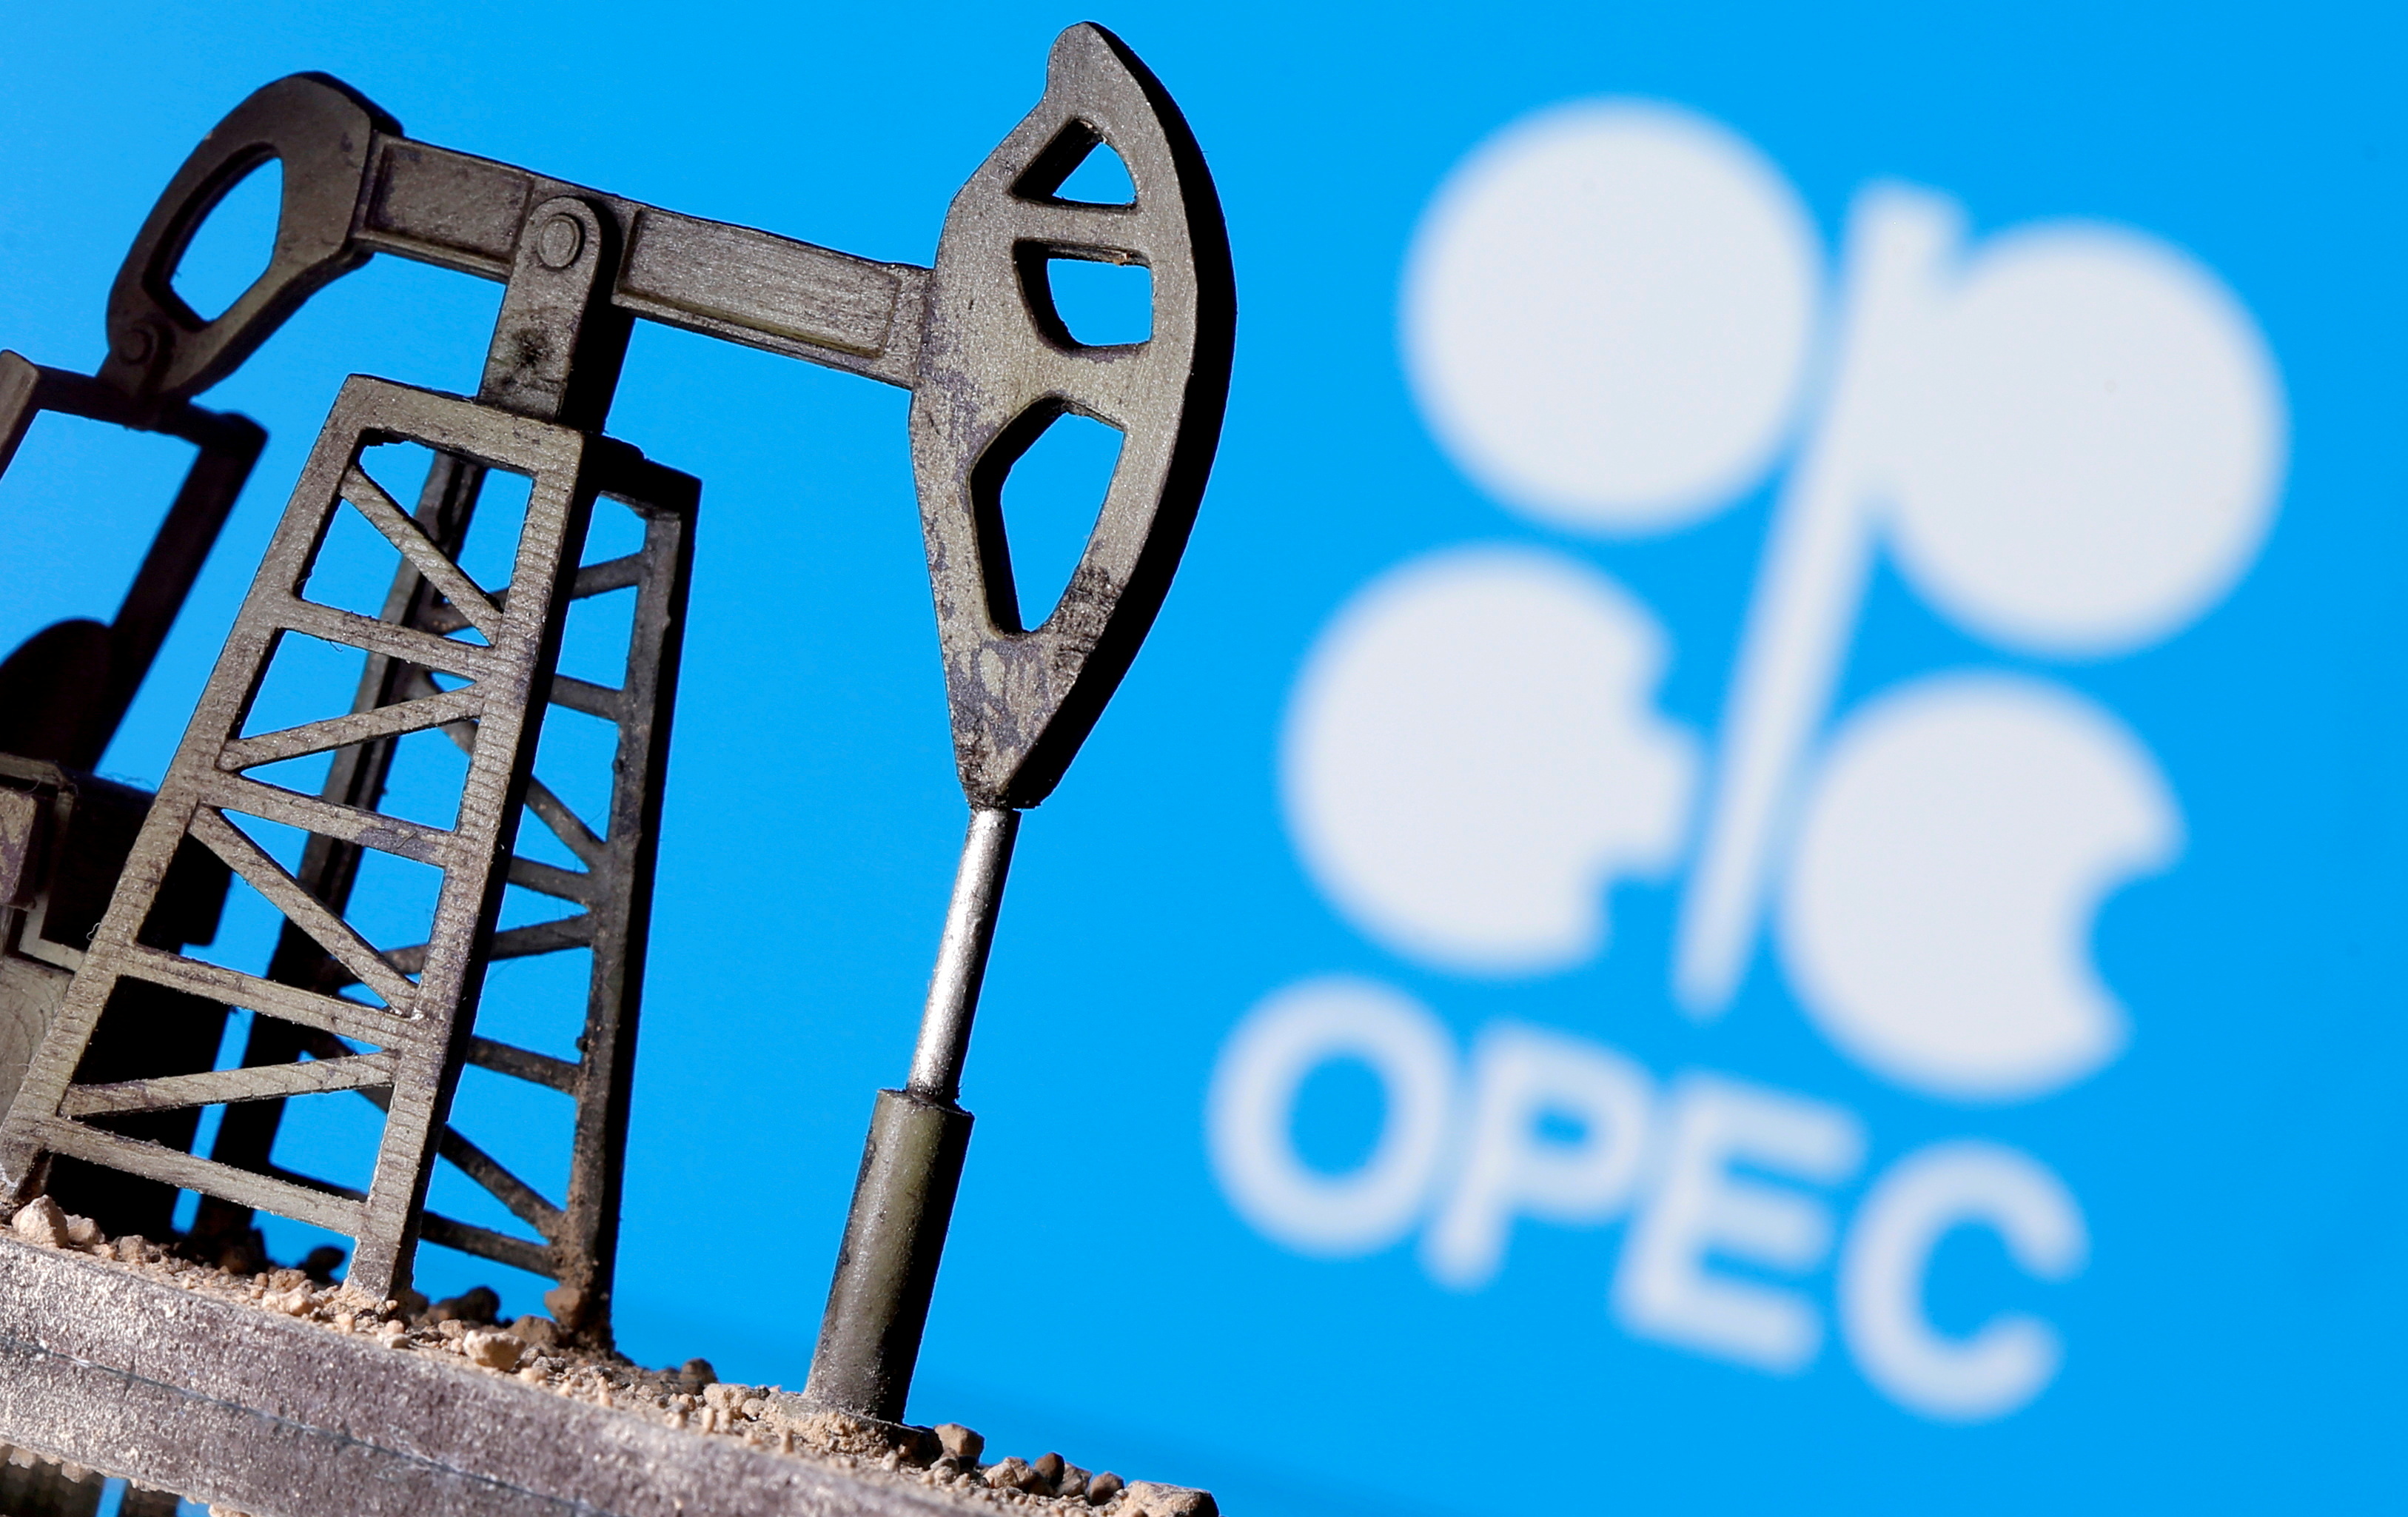 A 3D-printed oil pump jack is seen in front of a displayed OPEC logo in this illustration picture